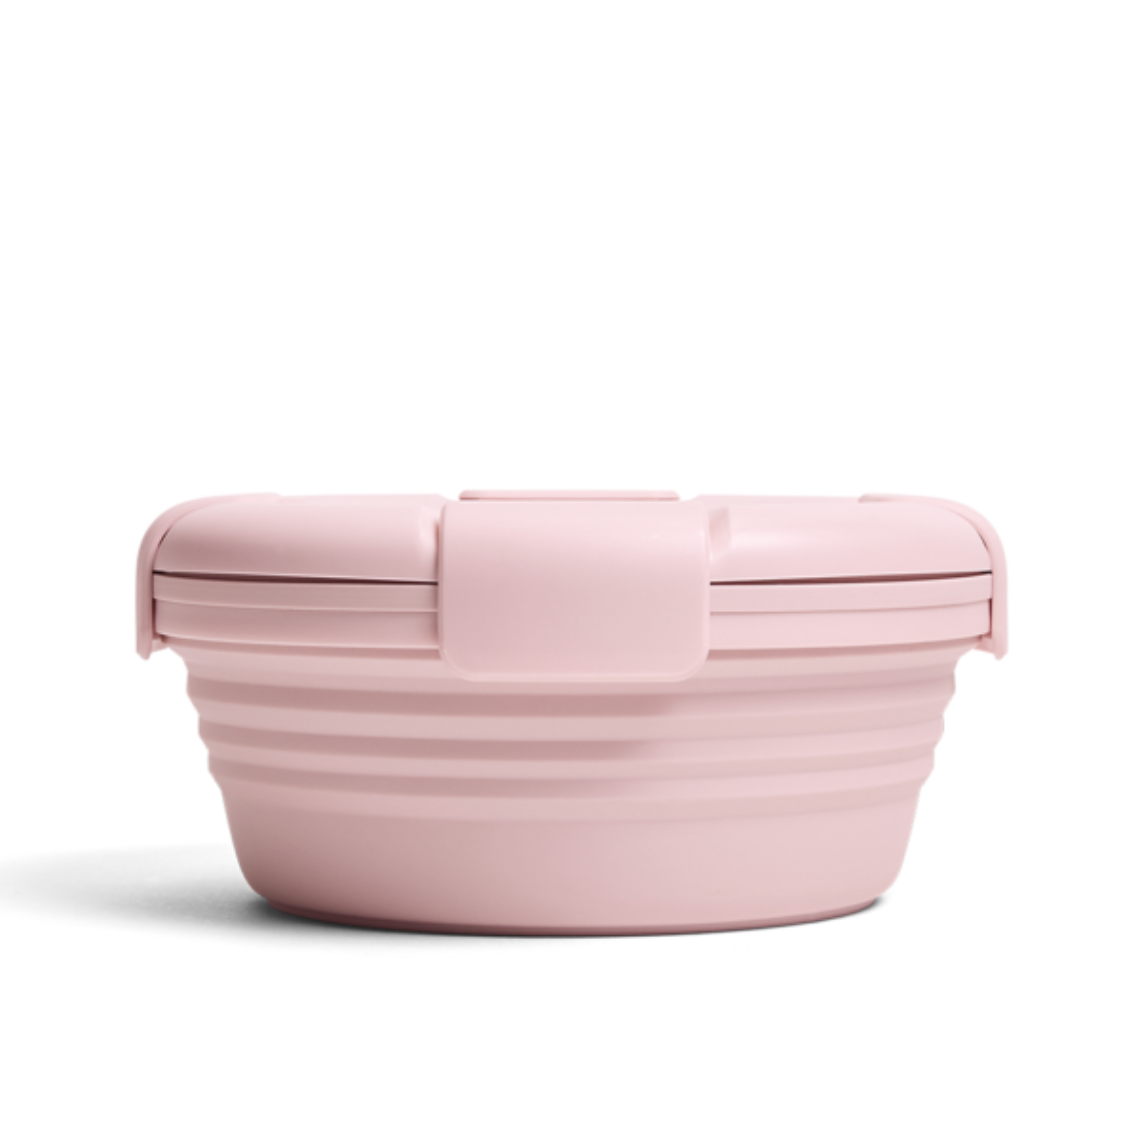 Stojo Collapsible Bowl - LM